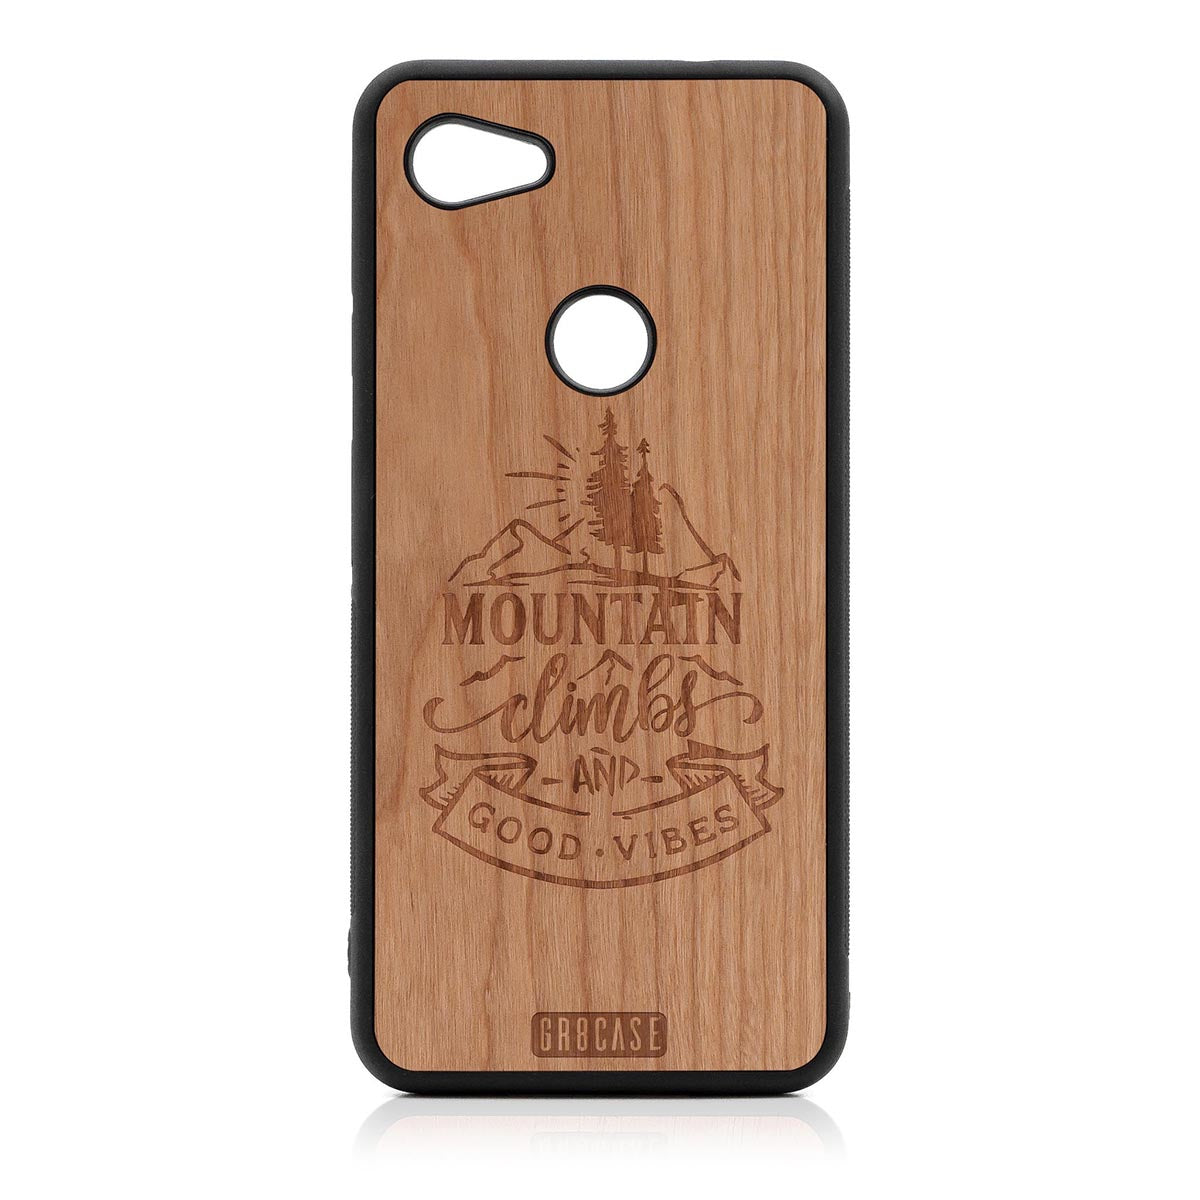 Mountain Climbs And Good Vibes Design Wood Case Google Pixel 3A by GR8CASE